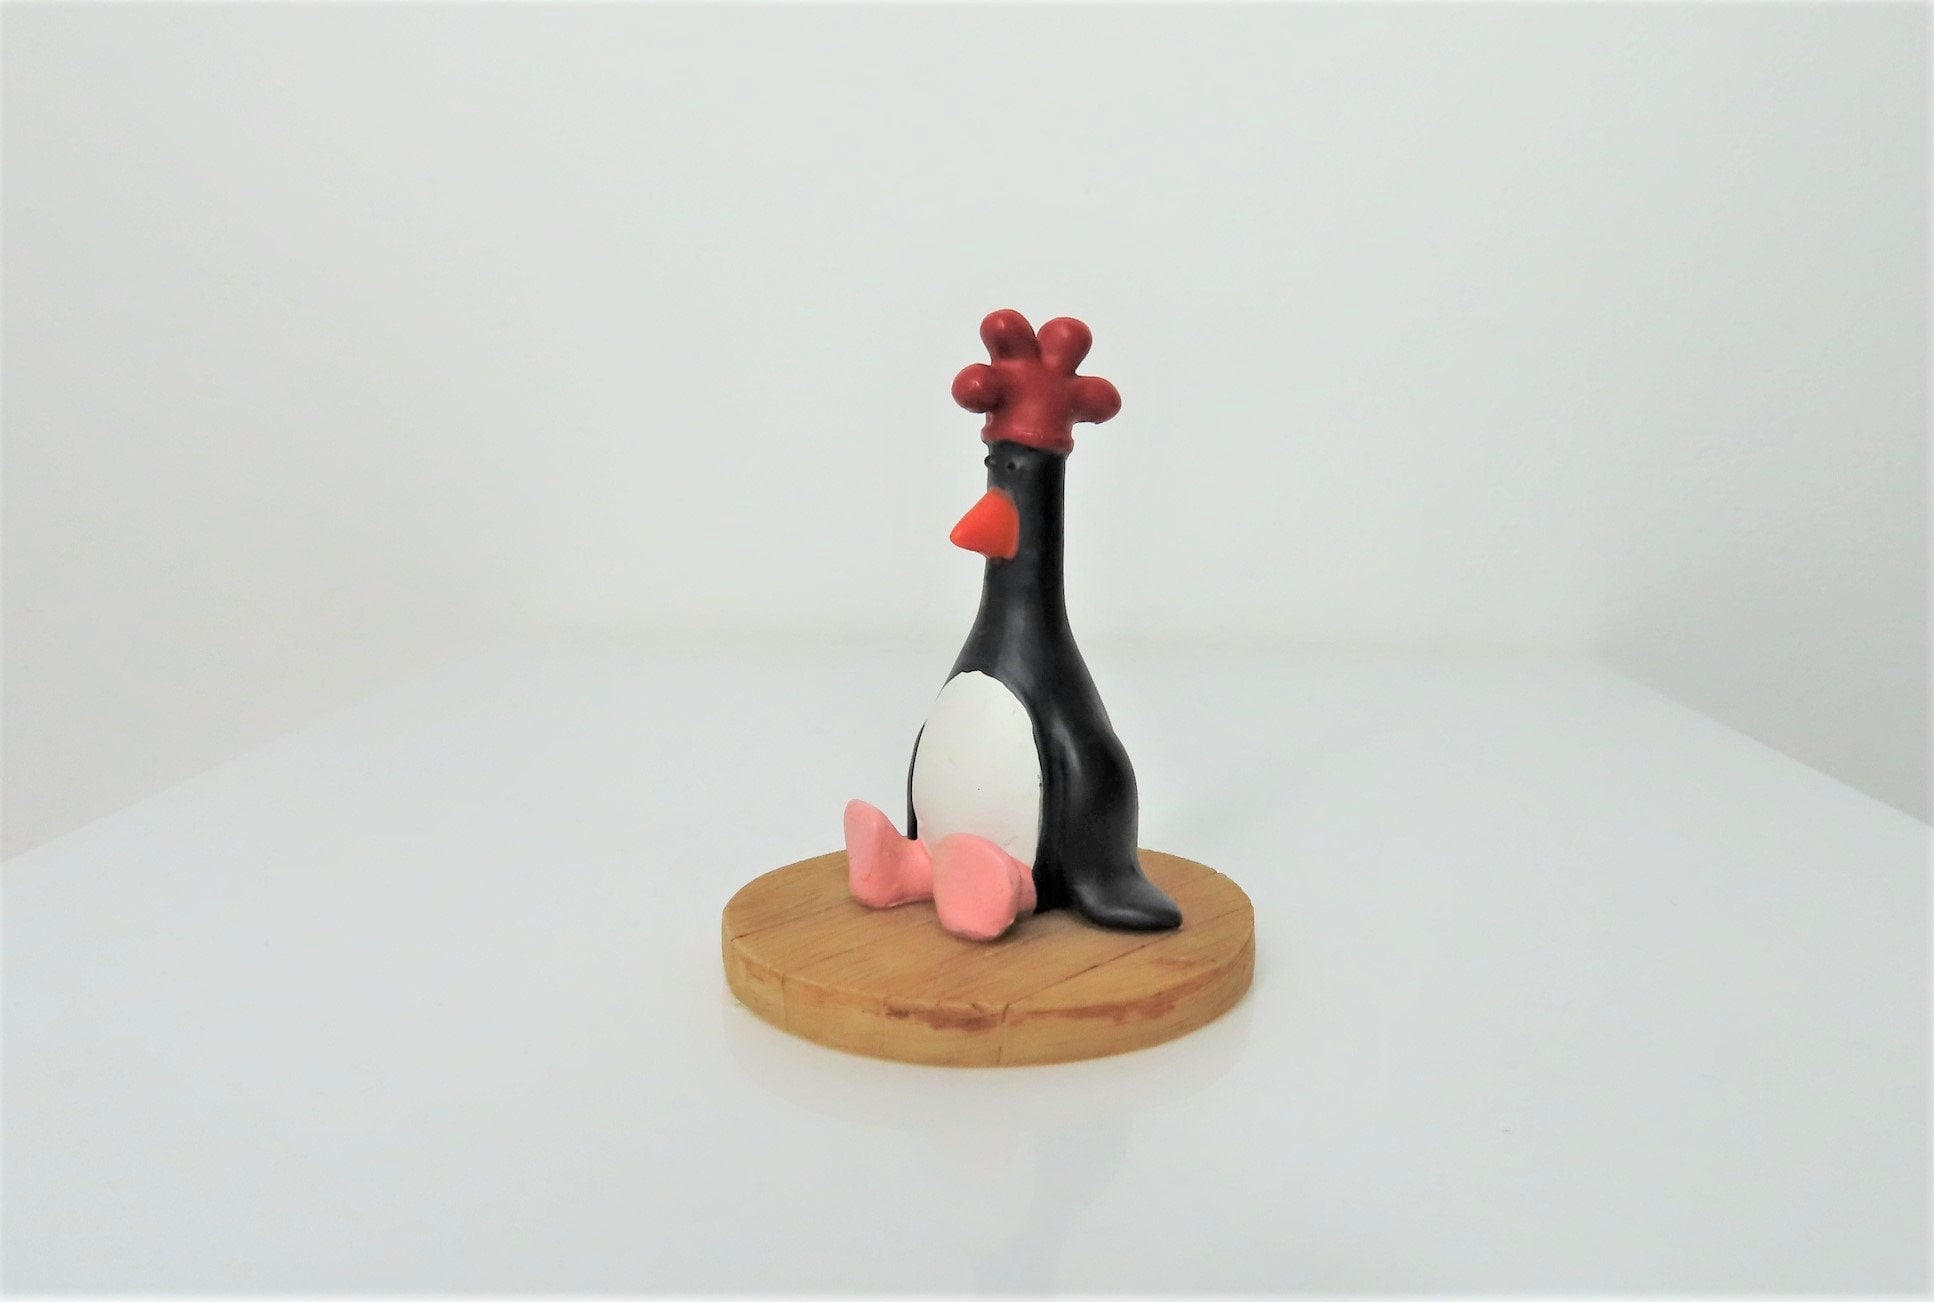 LEGO MOC Feathers McGraw the penguin - Wallace and Gromit by Runescope